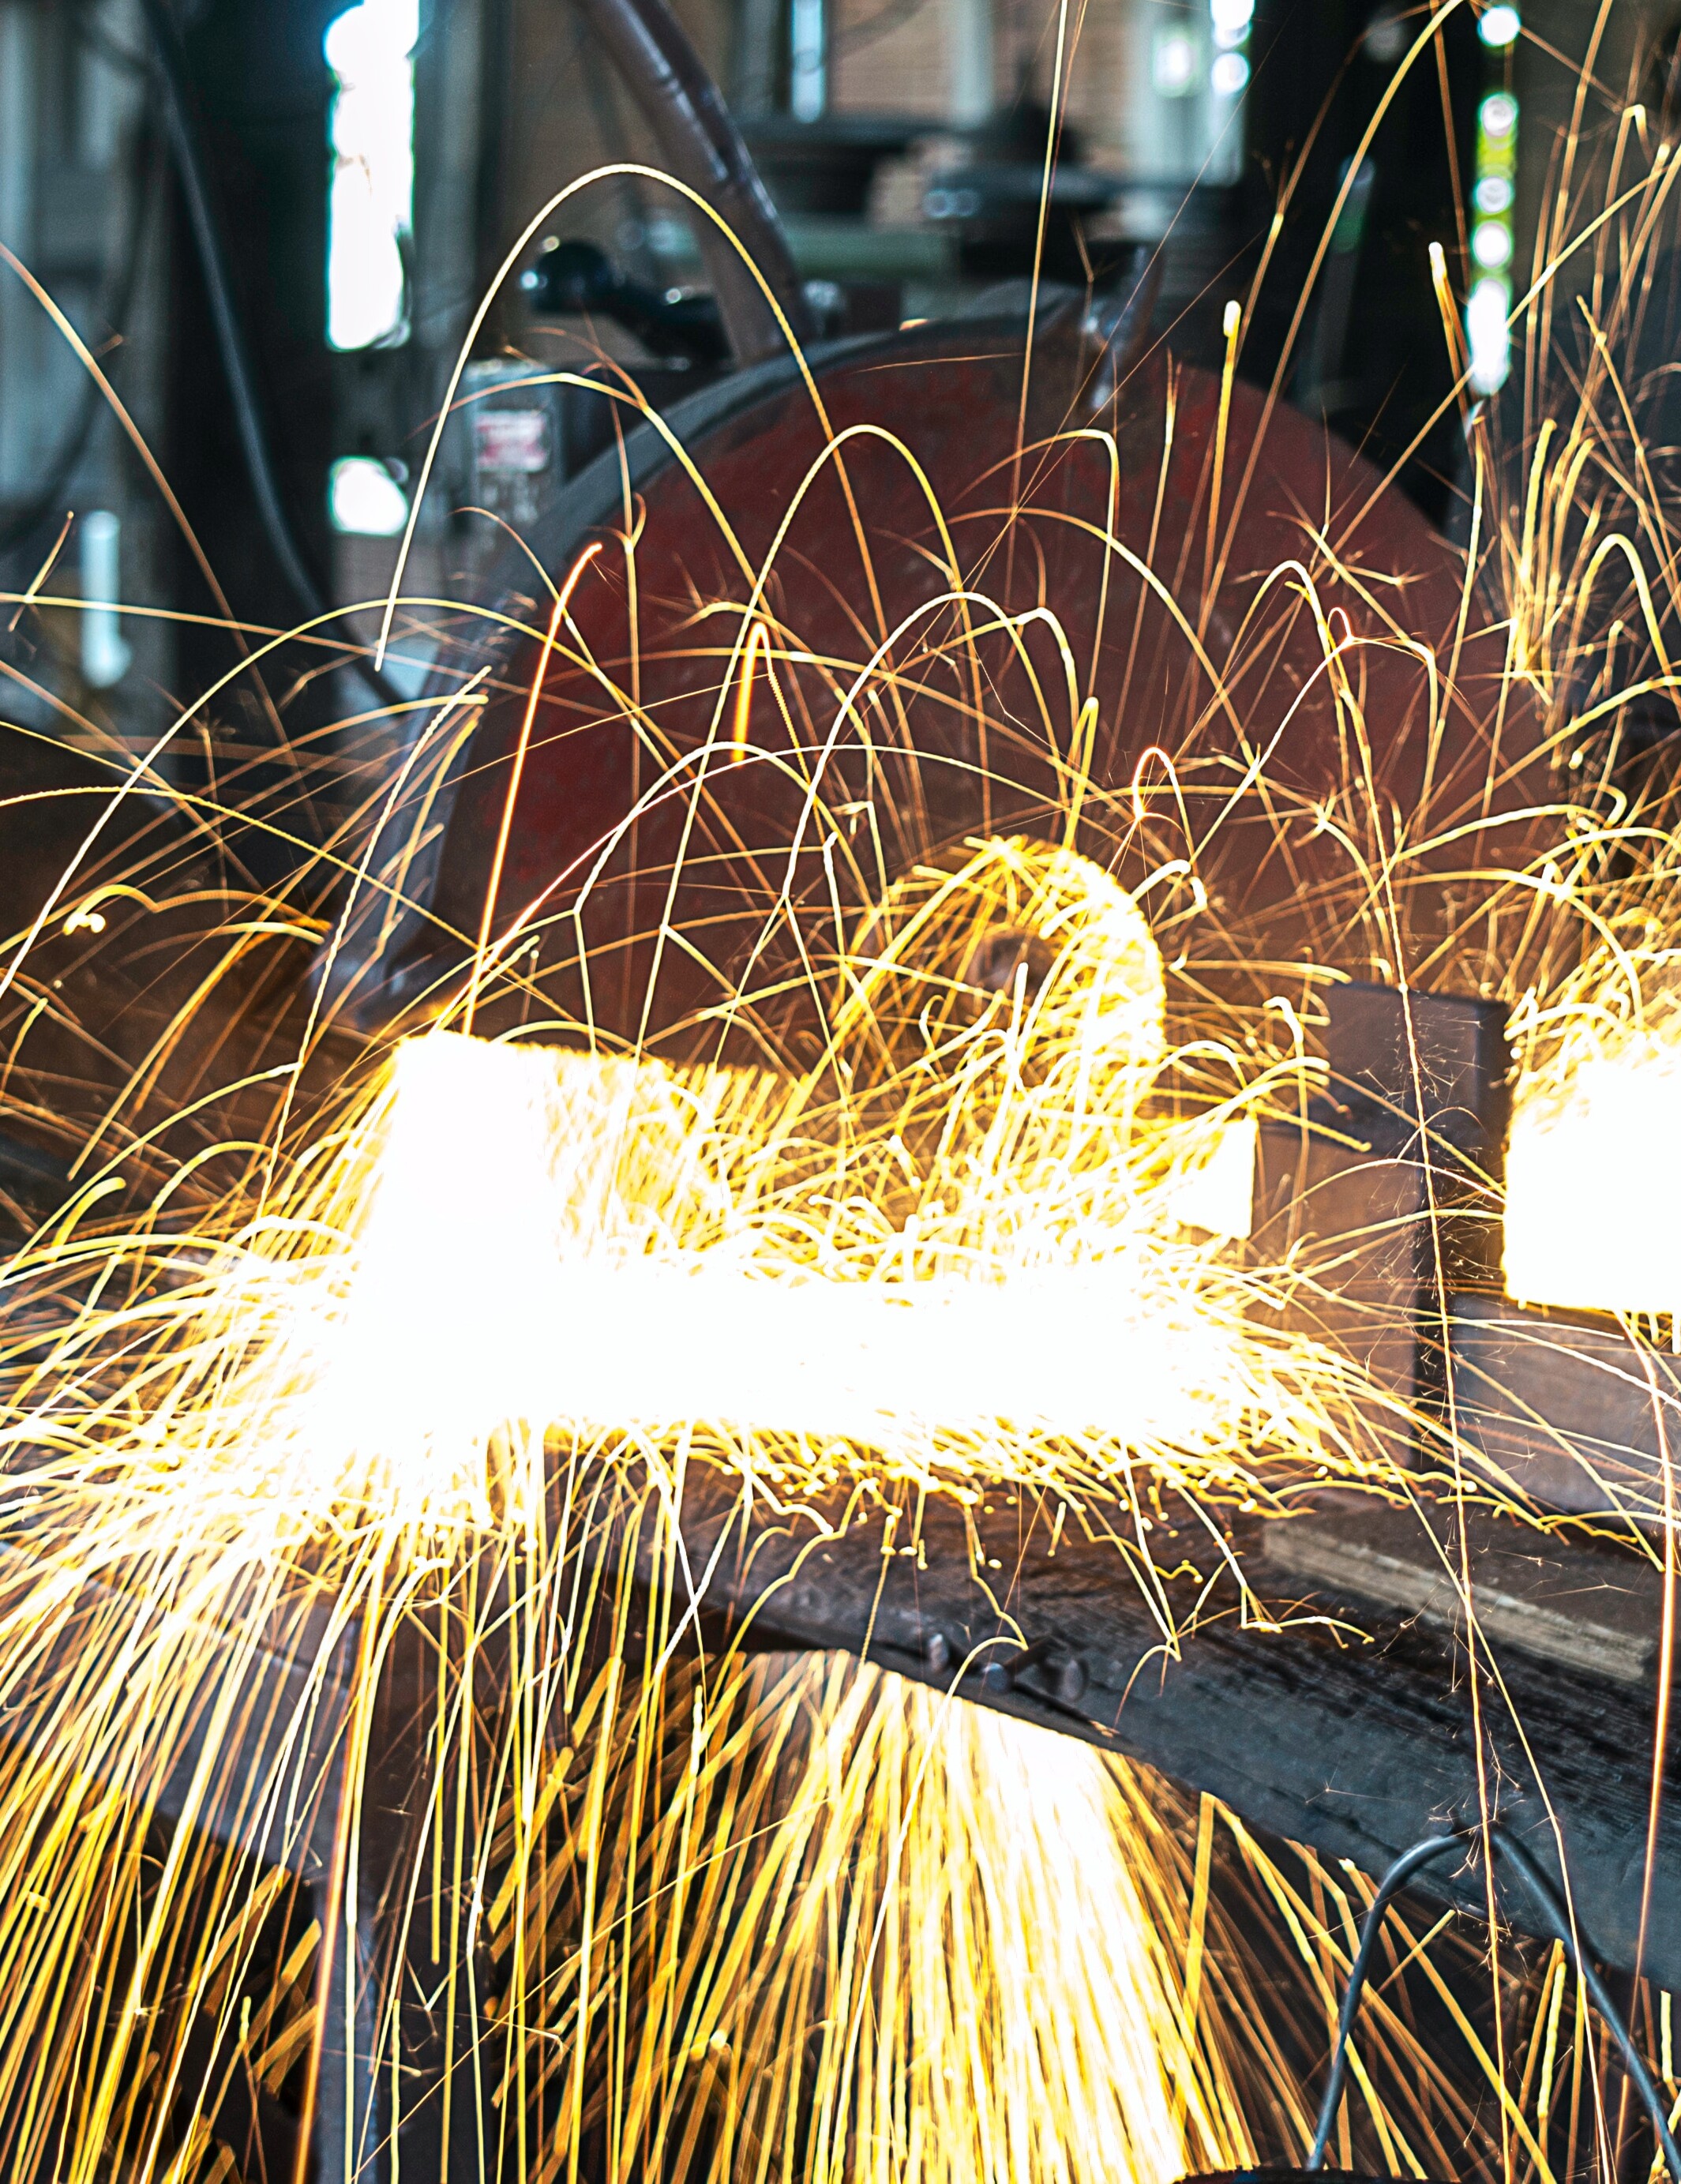 sparks flying from welding at AWI